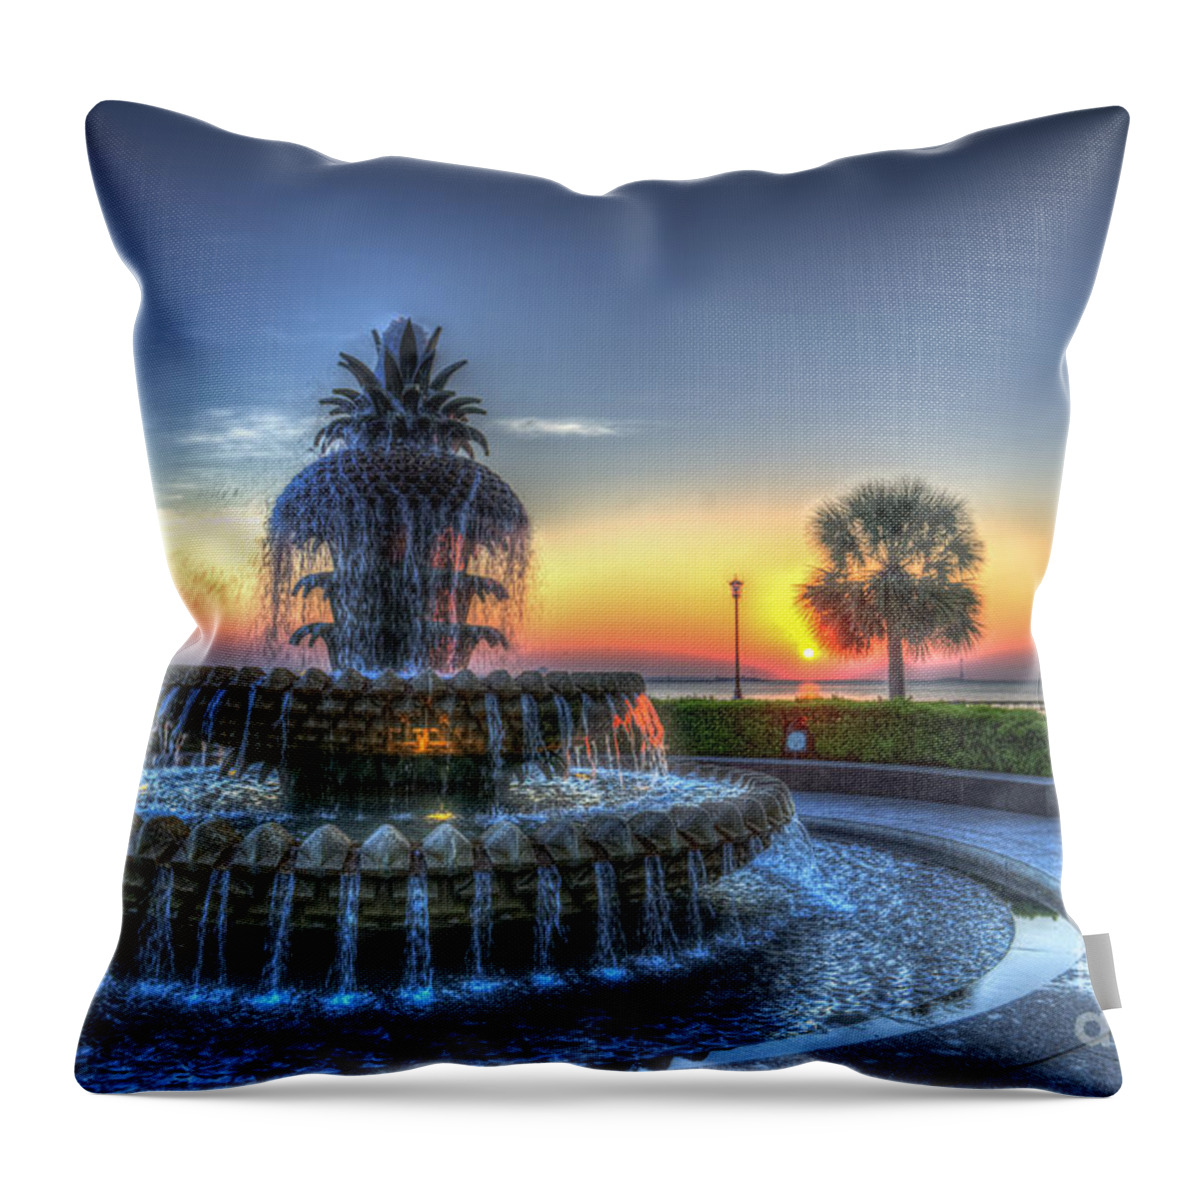 Pineapple Fountain Throw Pillow featuring the photograph Pineapple Glowing by Dale Powell